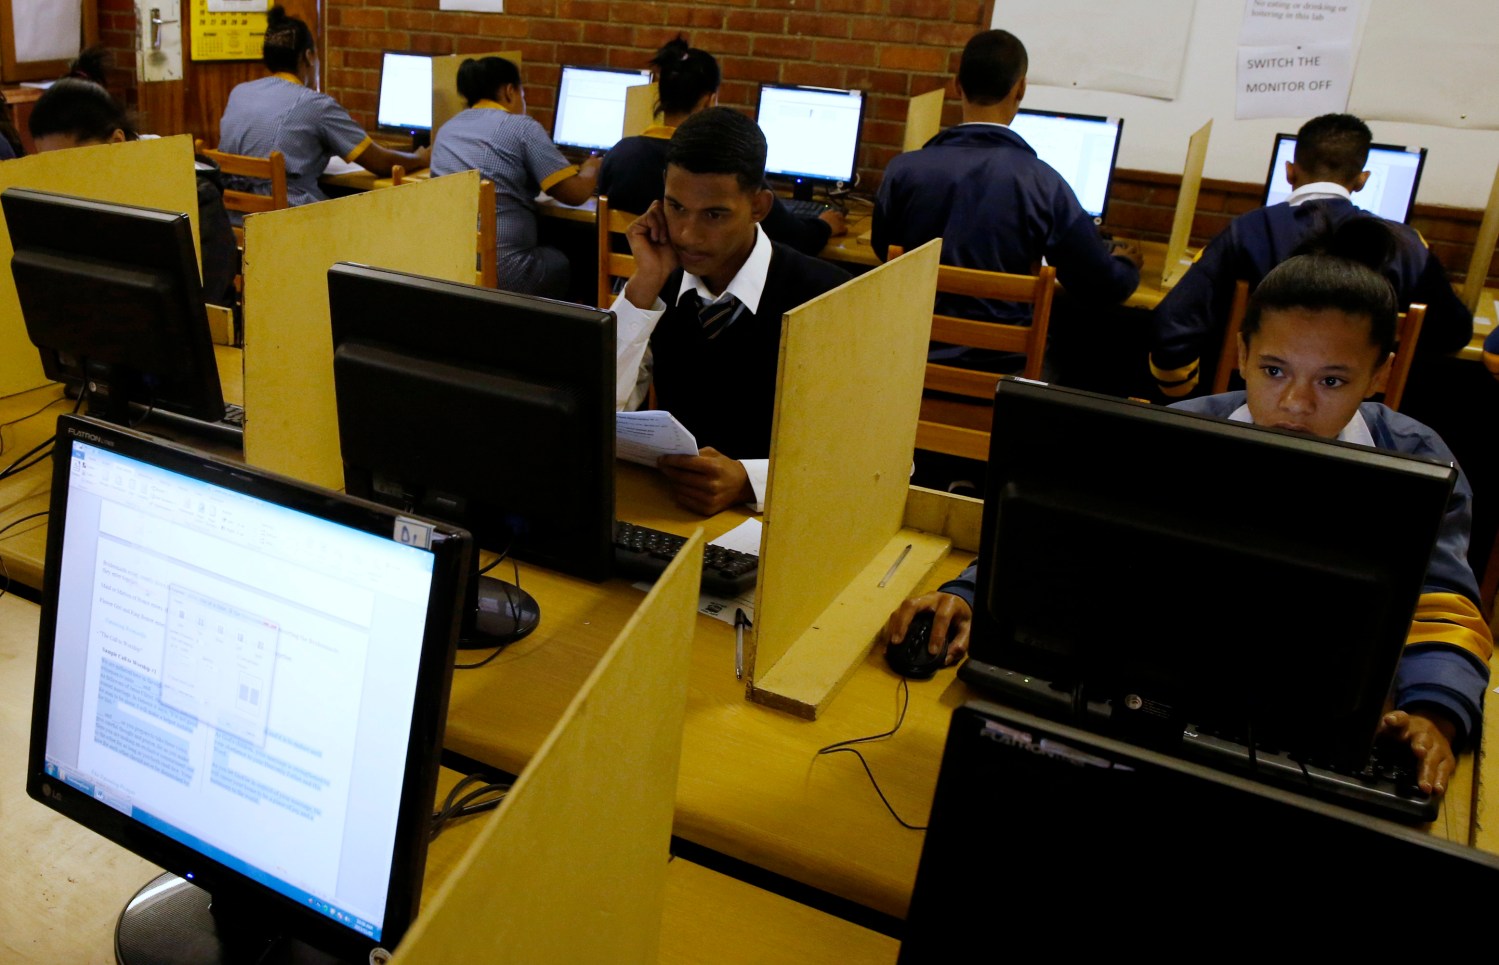 Students use computers to study at Elswood Secondary School in Cape Town November  7, 2013. Even the metal grills welded into its walls did not deter burglars from ripping out the copper cables that delivered Internet to the students of this tough neighbourhood. But Elswood's pupils were saved by alternative technology - free wireless connection via unused TV spectrum known as white space. It's being provided by a consortium including Google  as part of a wider trial. Elsewhere in the country Microsoft  is operating similar pilots. Both are racing to fine tune a technology that could ultimately bring cheap broadband to the entire continent. Picture taken November 7, 2013. To match Feature AFRICA-INTERNET/ REUTERS/Mike Hutchings  (SOUTH AFRICA - Tags: EDUCATION BUSINESS SCIENCE TECHNOLOGY) - GM1E9BA1EGA01